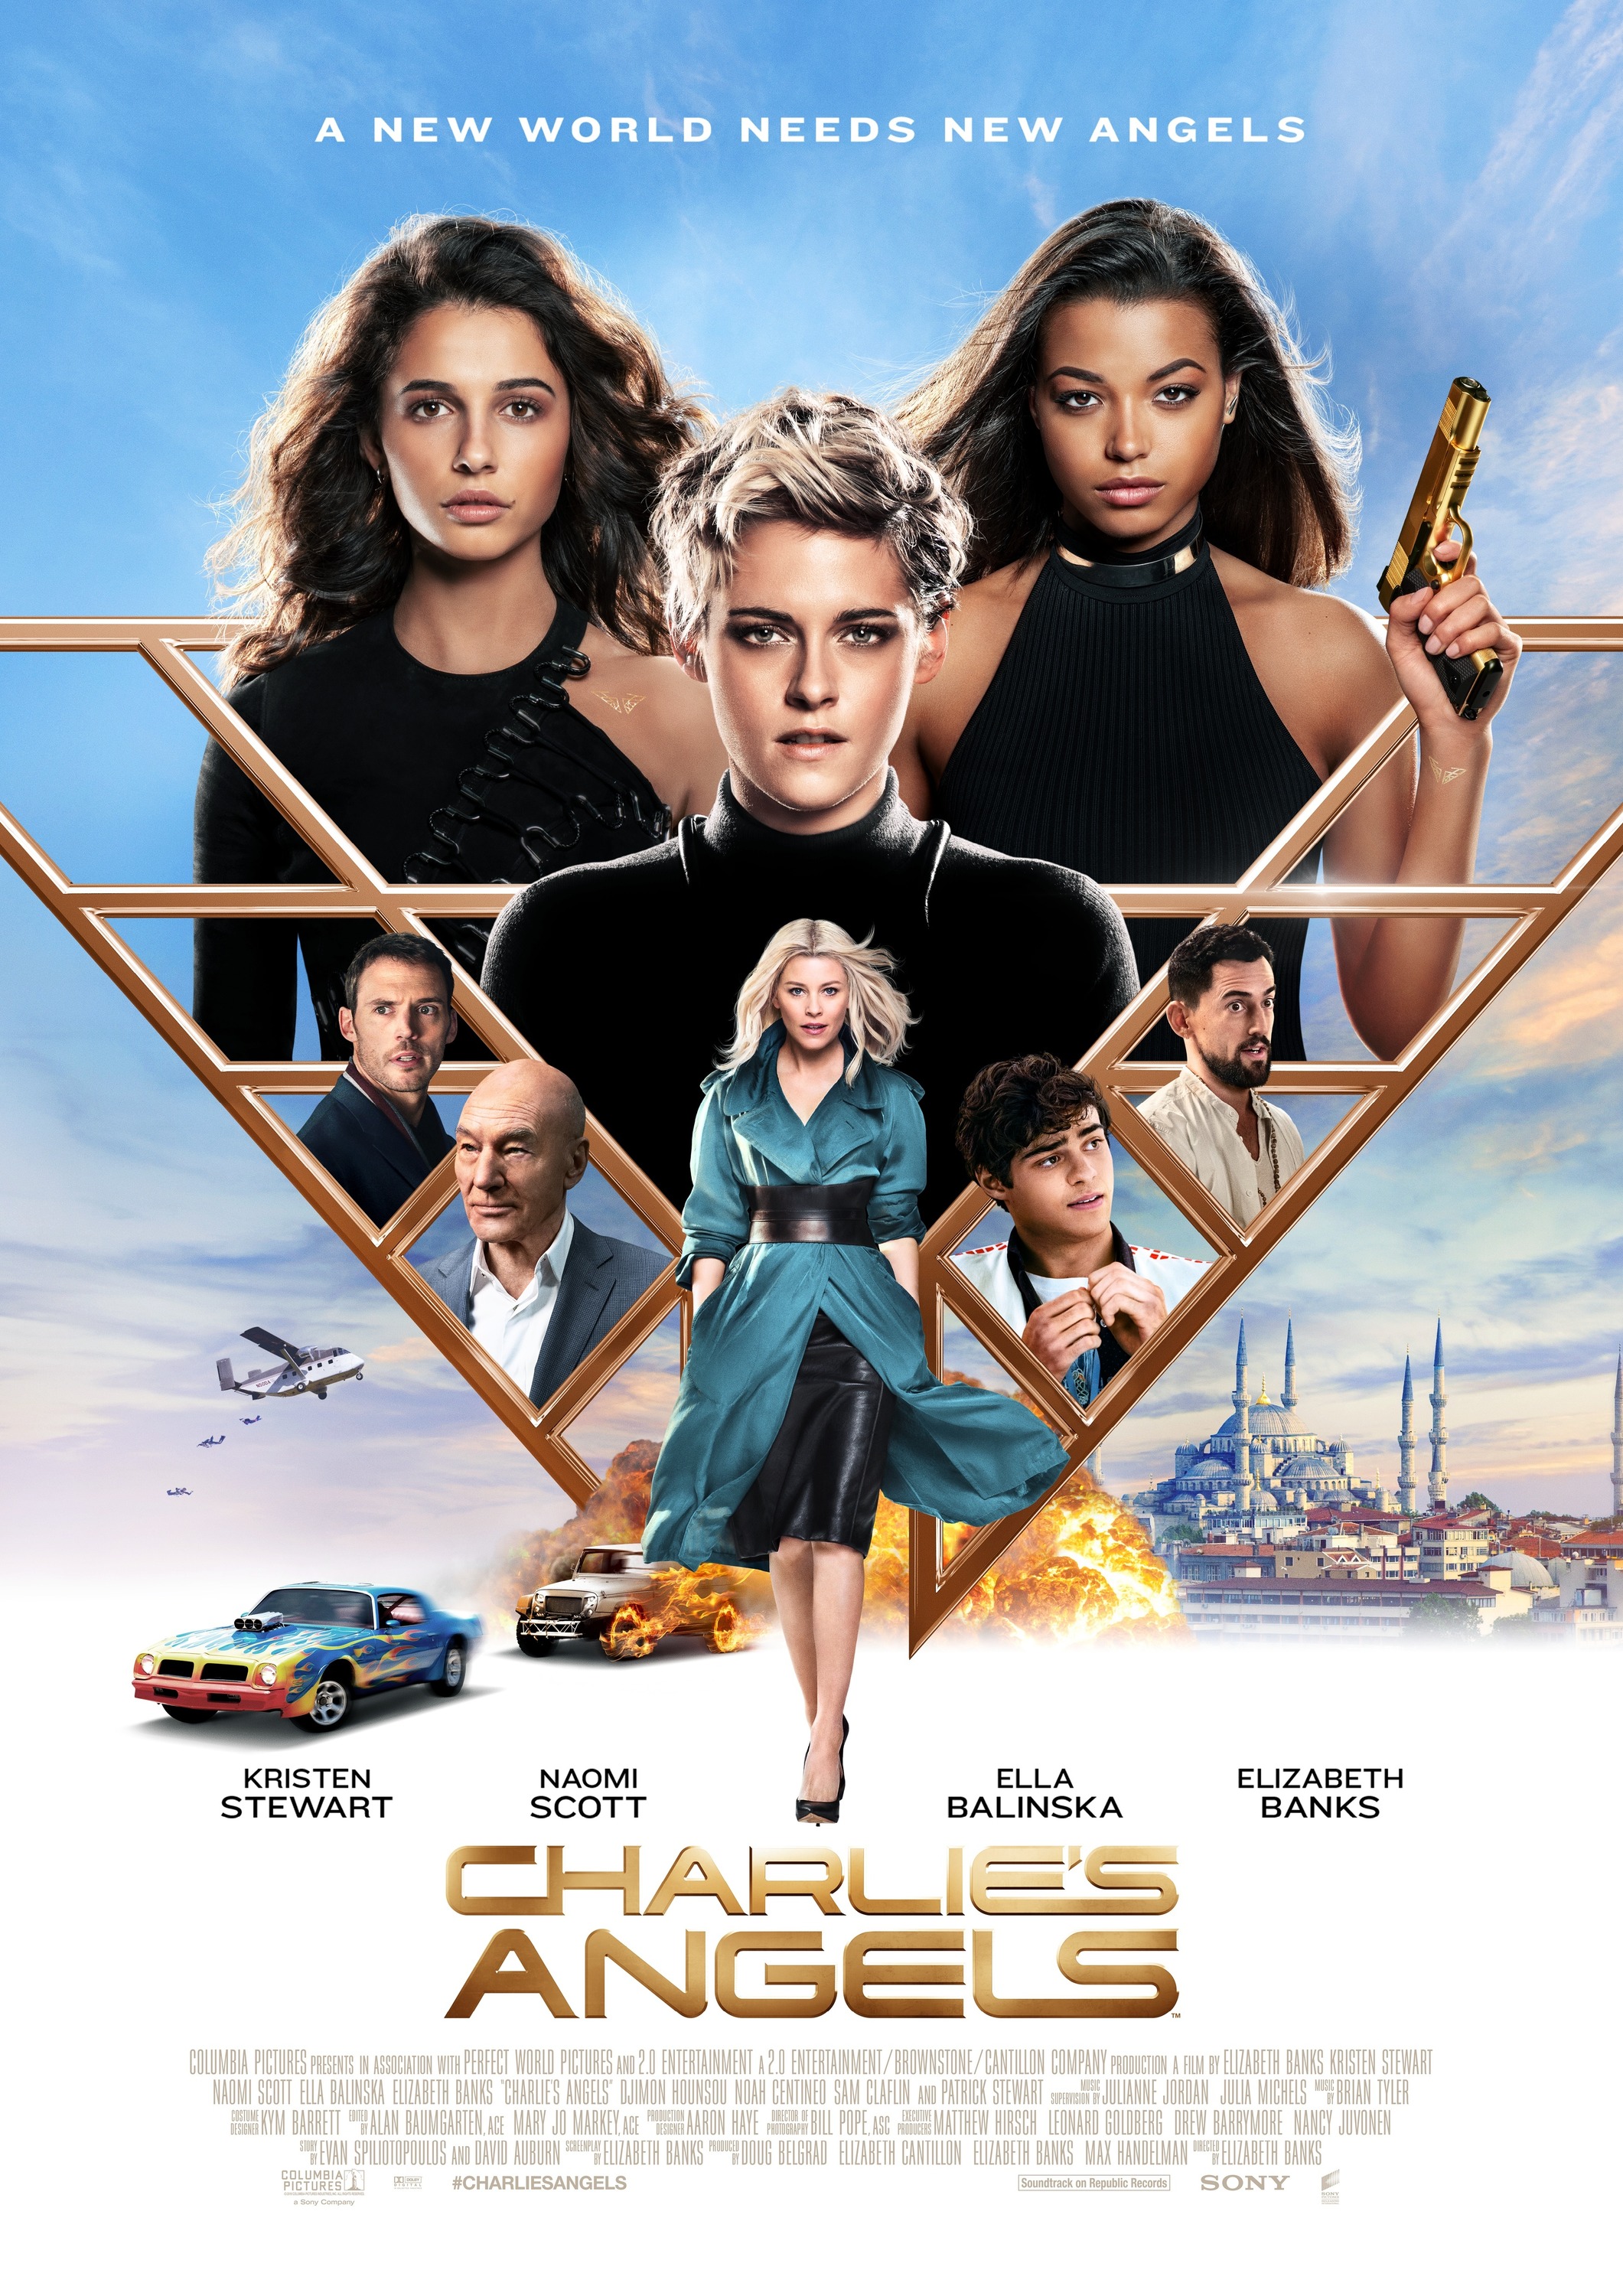 CHARLIE'S ANGELS Unite & Conquer With A Kickass New Trailer As Tickets